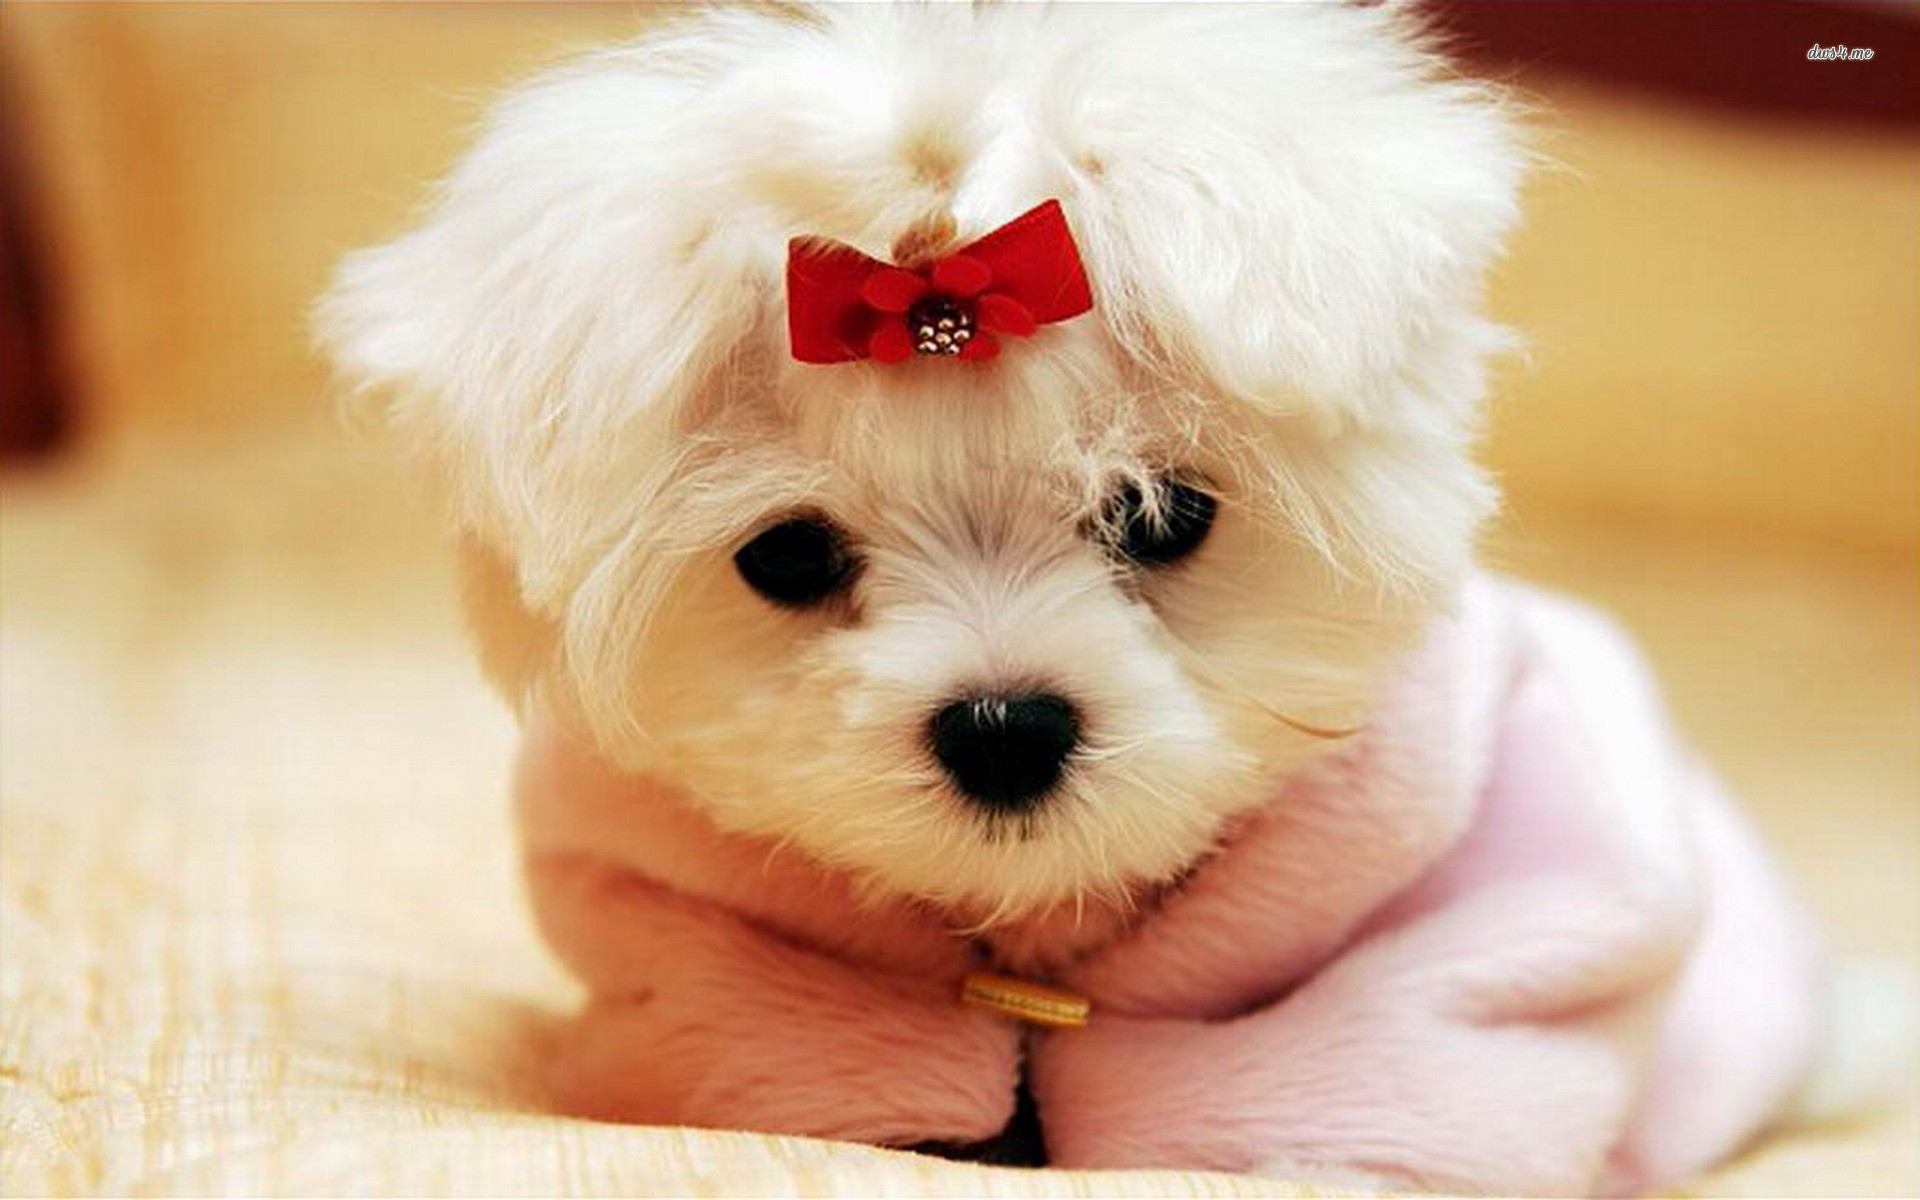 1920x1200 Hot Images Of Cute Puppies - Qygjxz as Astonishing The Cutest Puppy Ever  Wallpaper